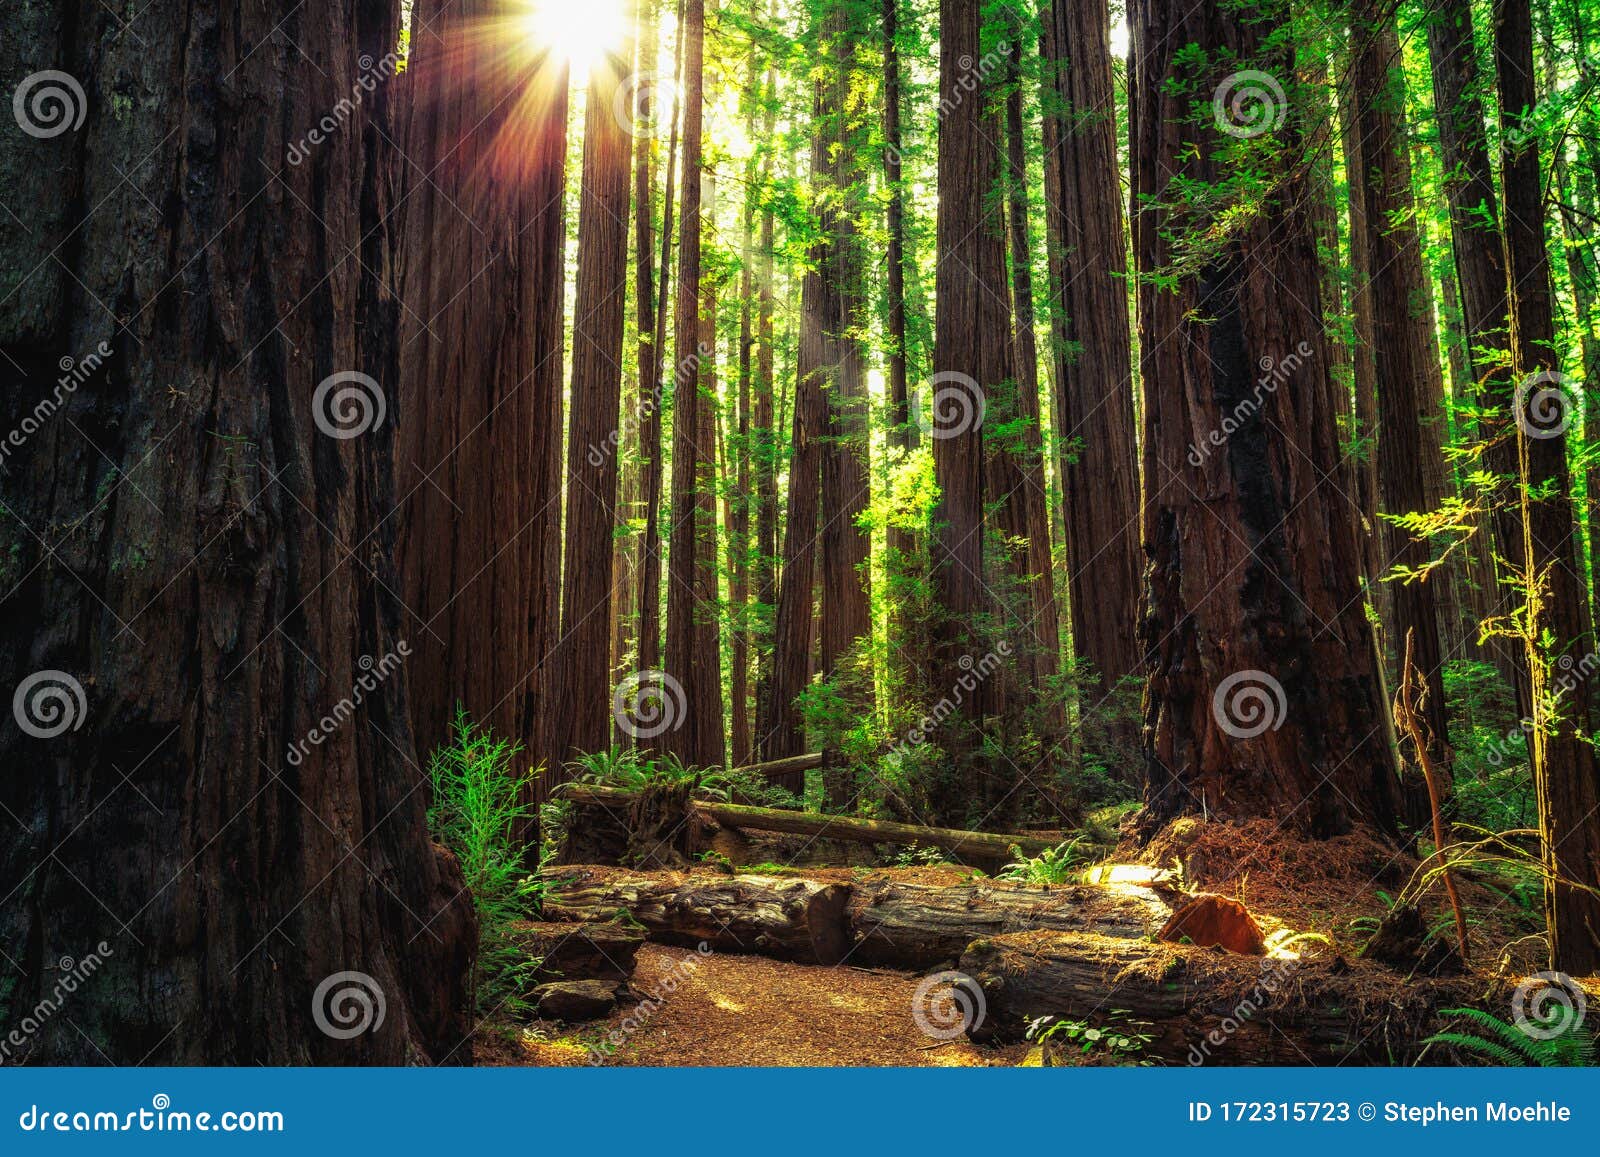 sunrise in the redwoods, redwoods national & state parks california